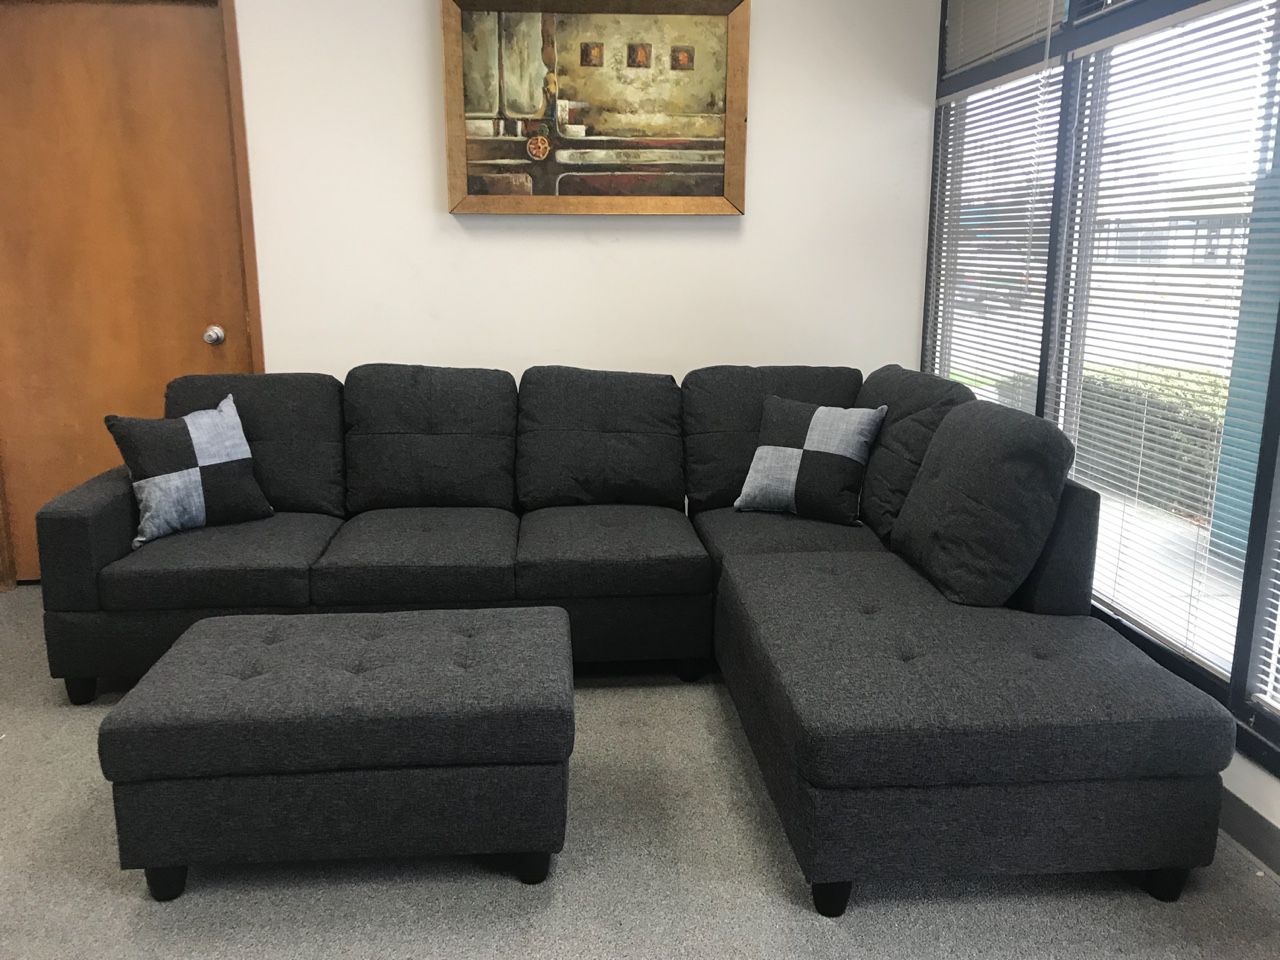 New Dark Gray Sectional Sofa Charcoal Couch With Storage Ottoman And Pillows New In Packaging 